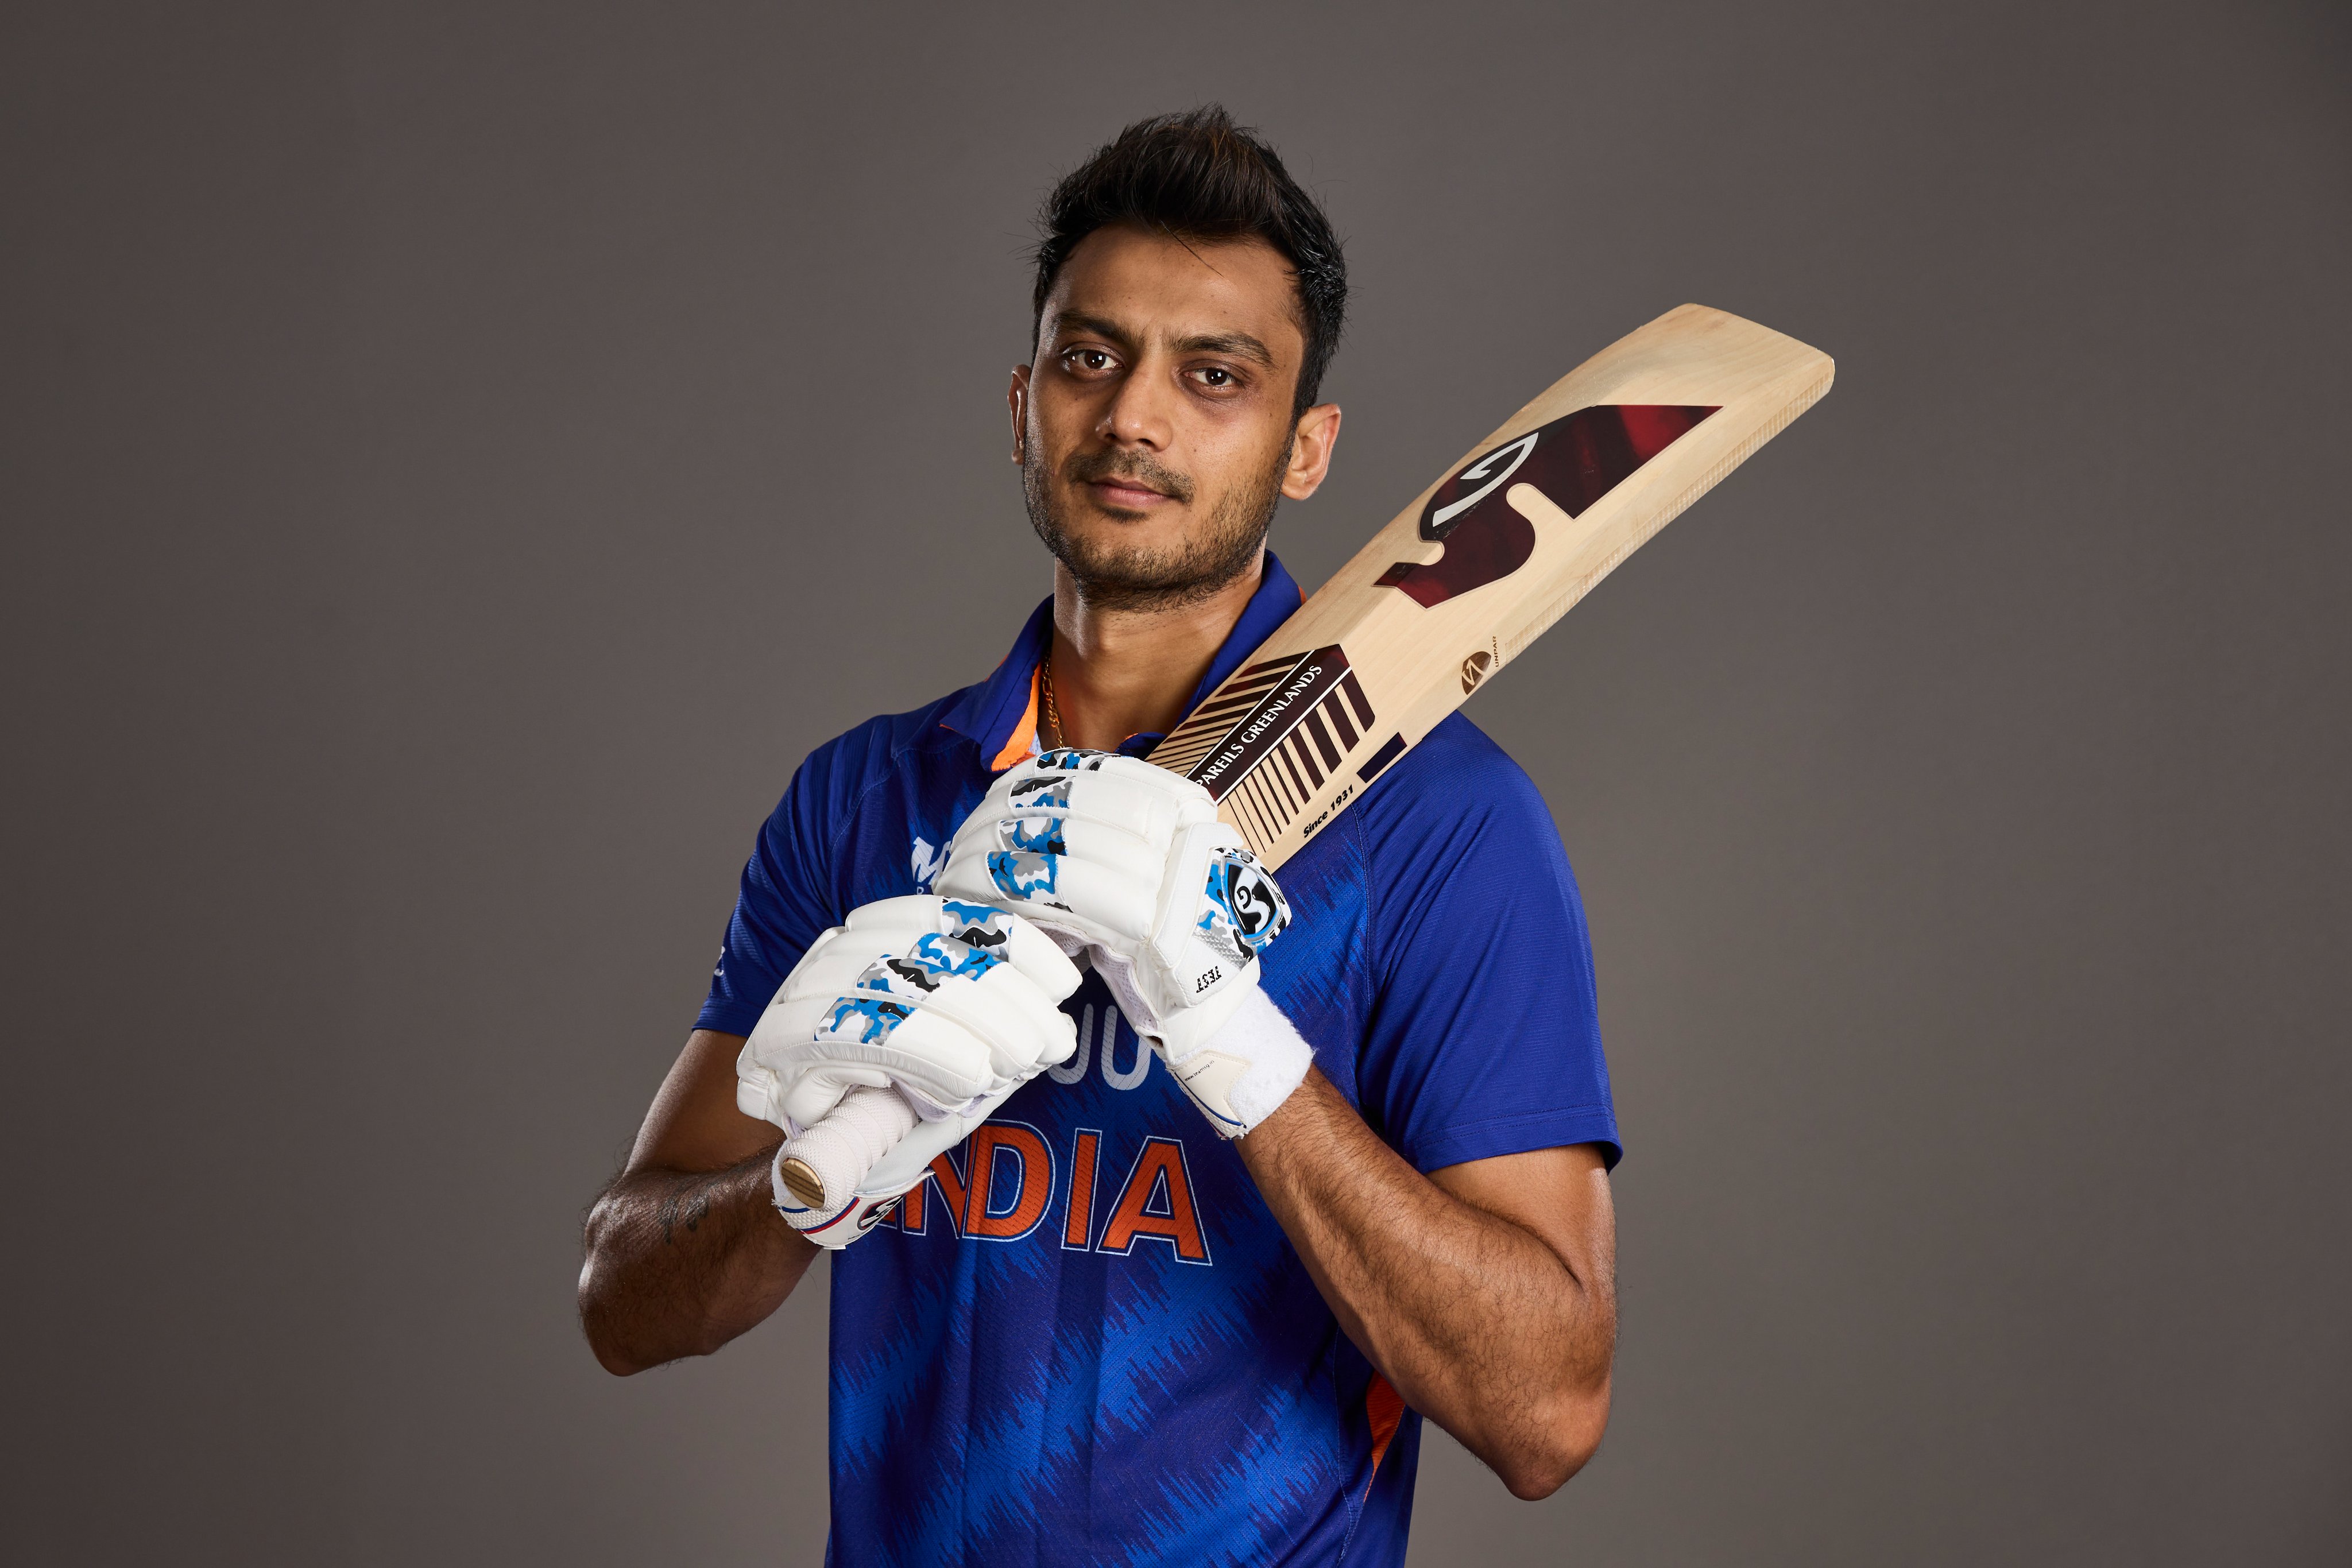 IND vs WI 2022, 2nd ODI | Internet reacts as Axar Patel scripts series win for India with a two-wicket victory